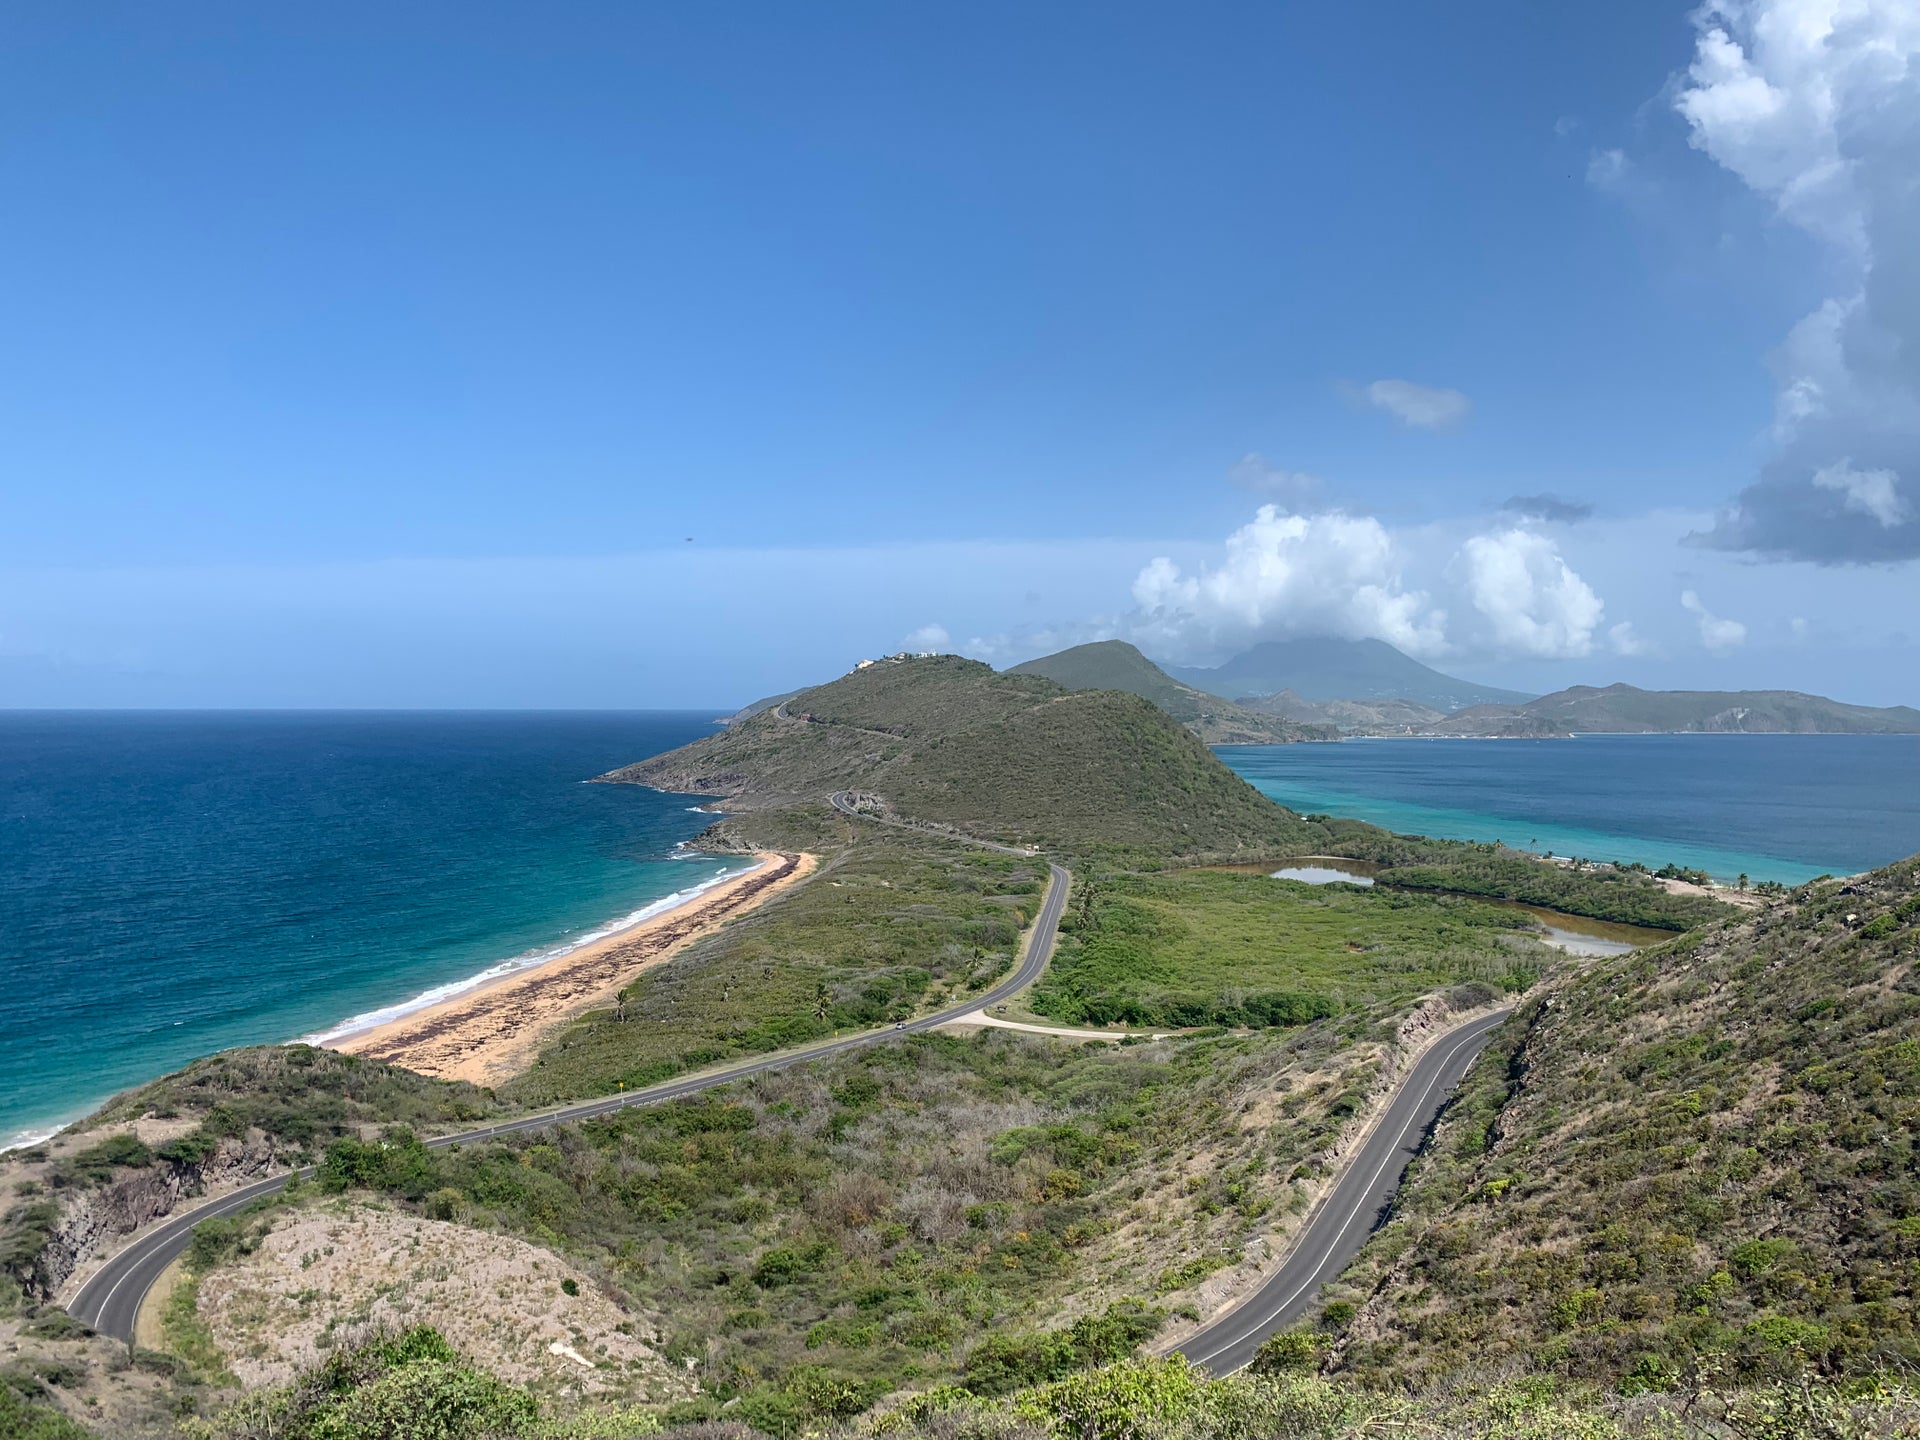 5 Things Families Should Do in St. Kitts - The Points Guy